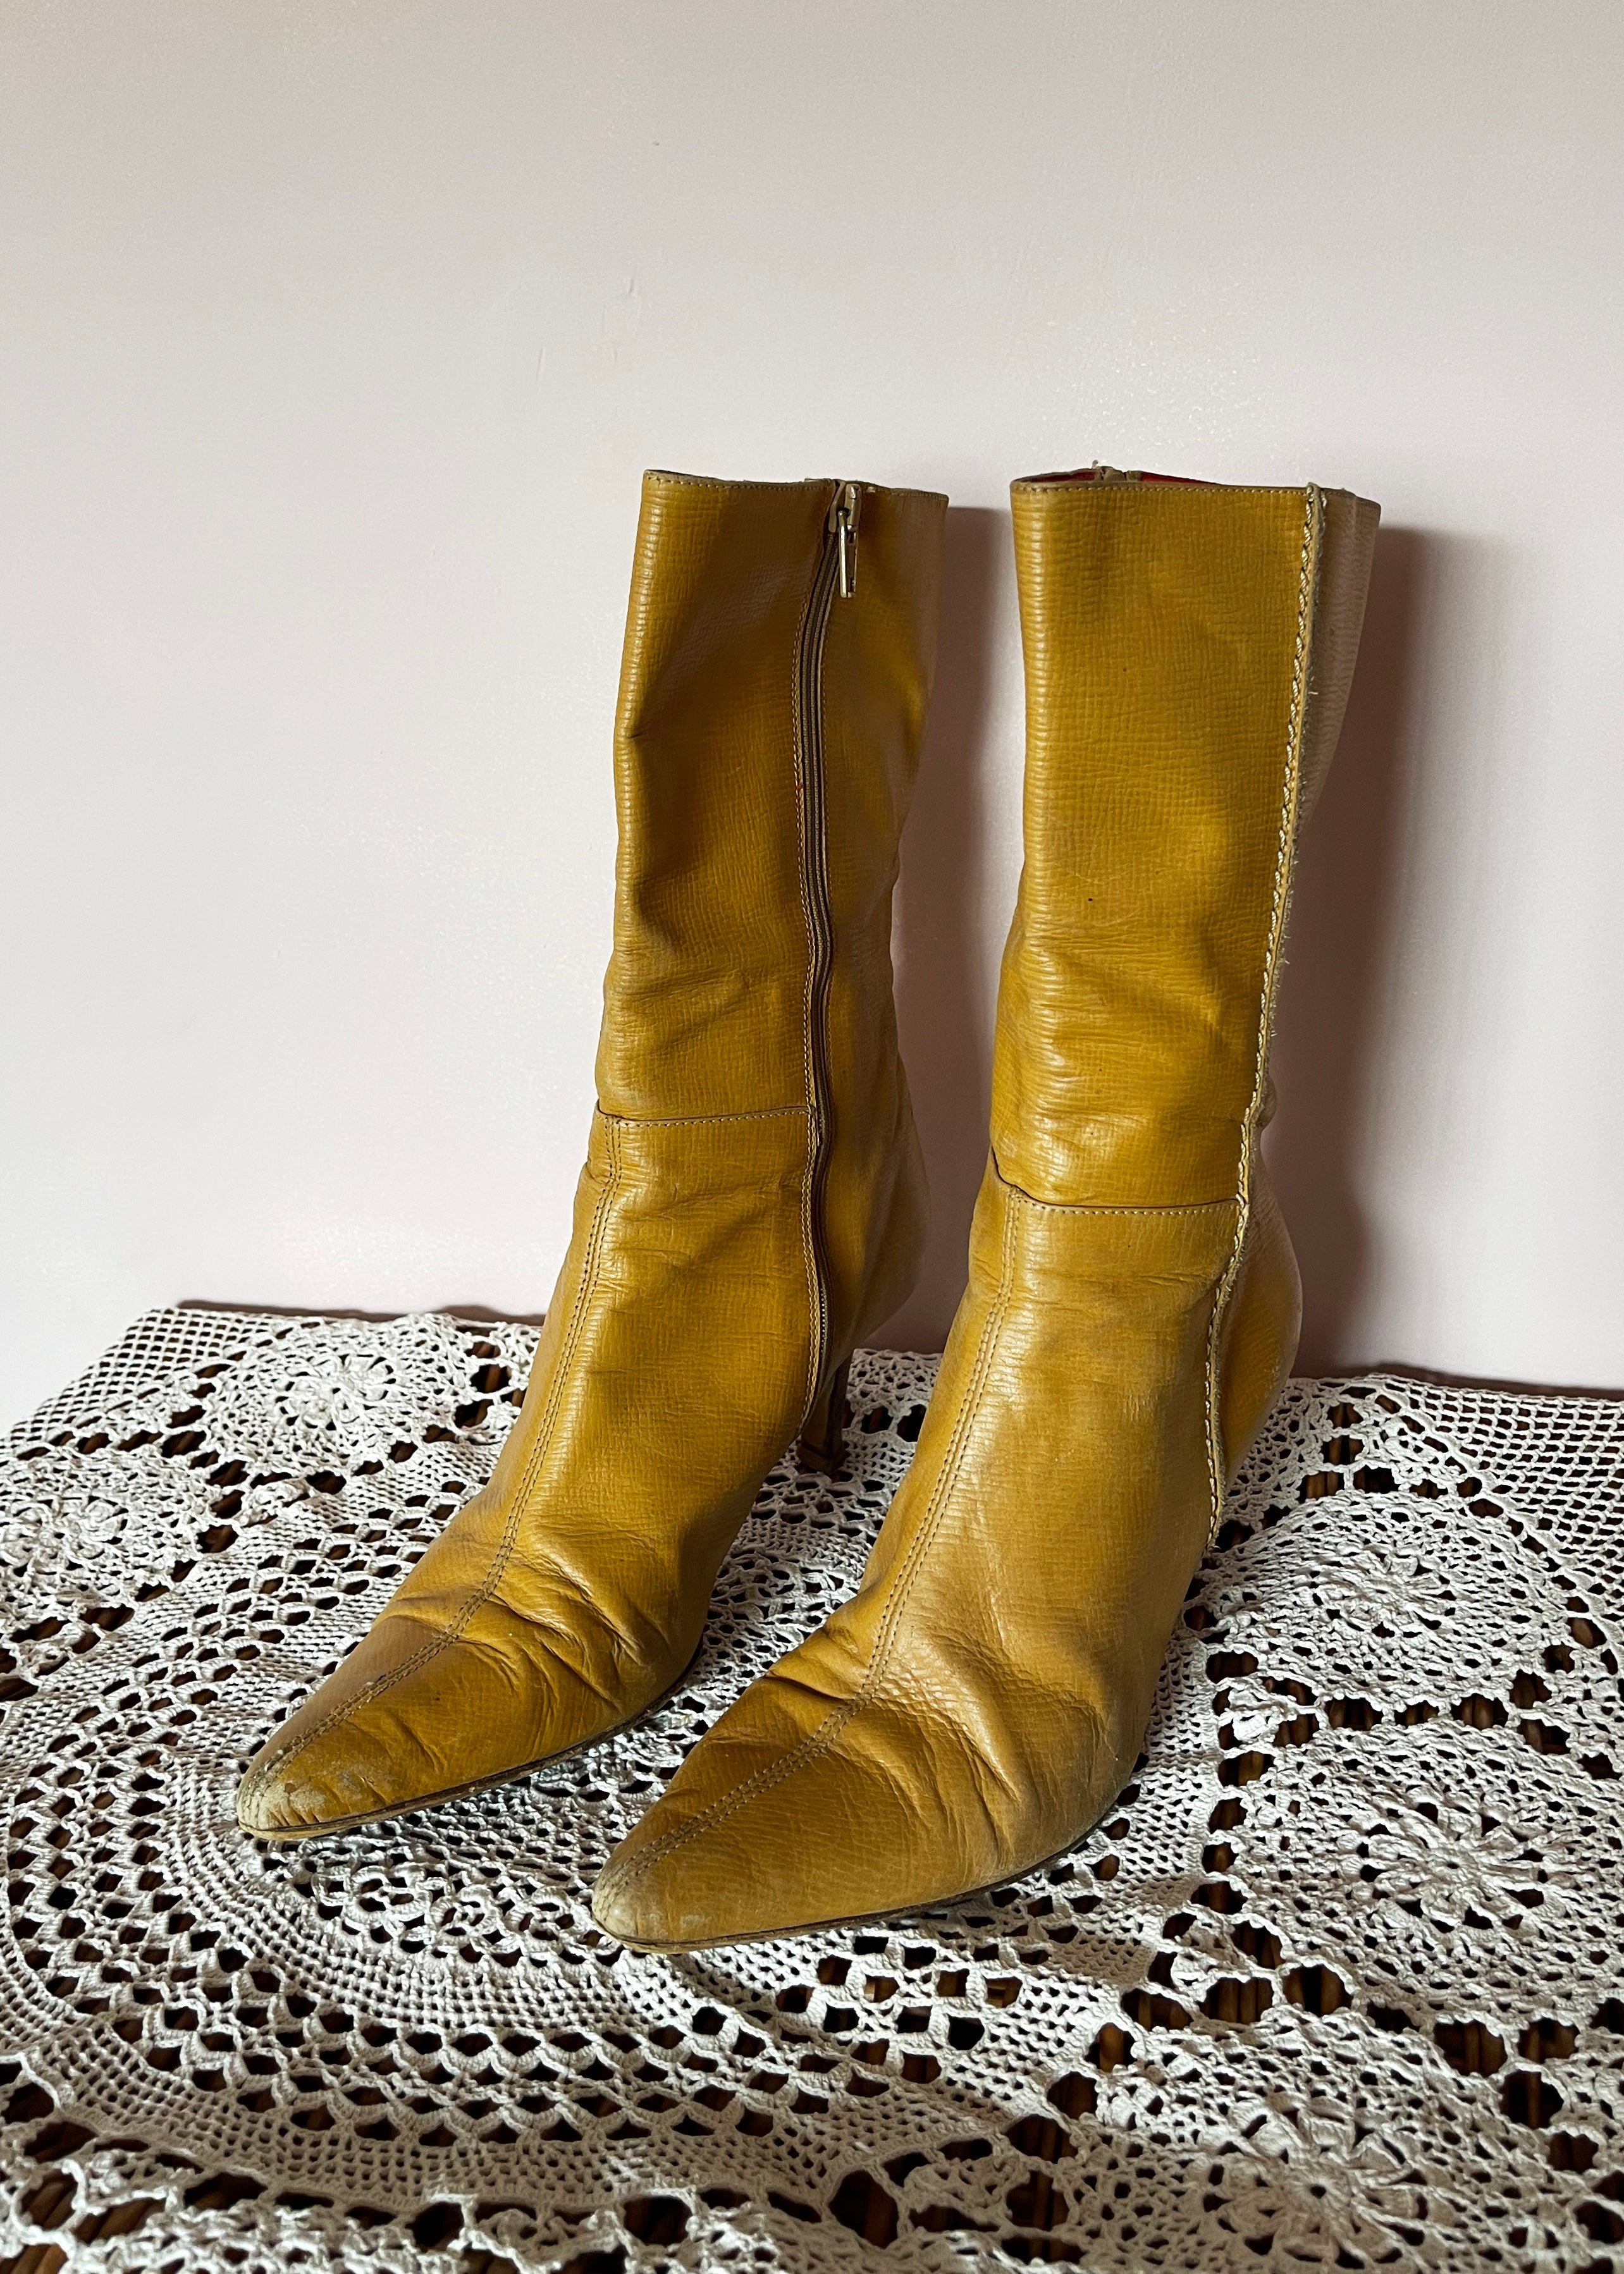 DKNY Tan Leather Boots